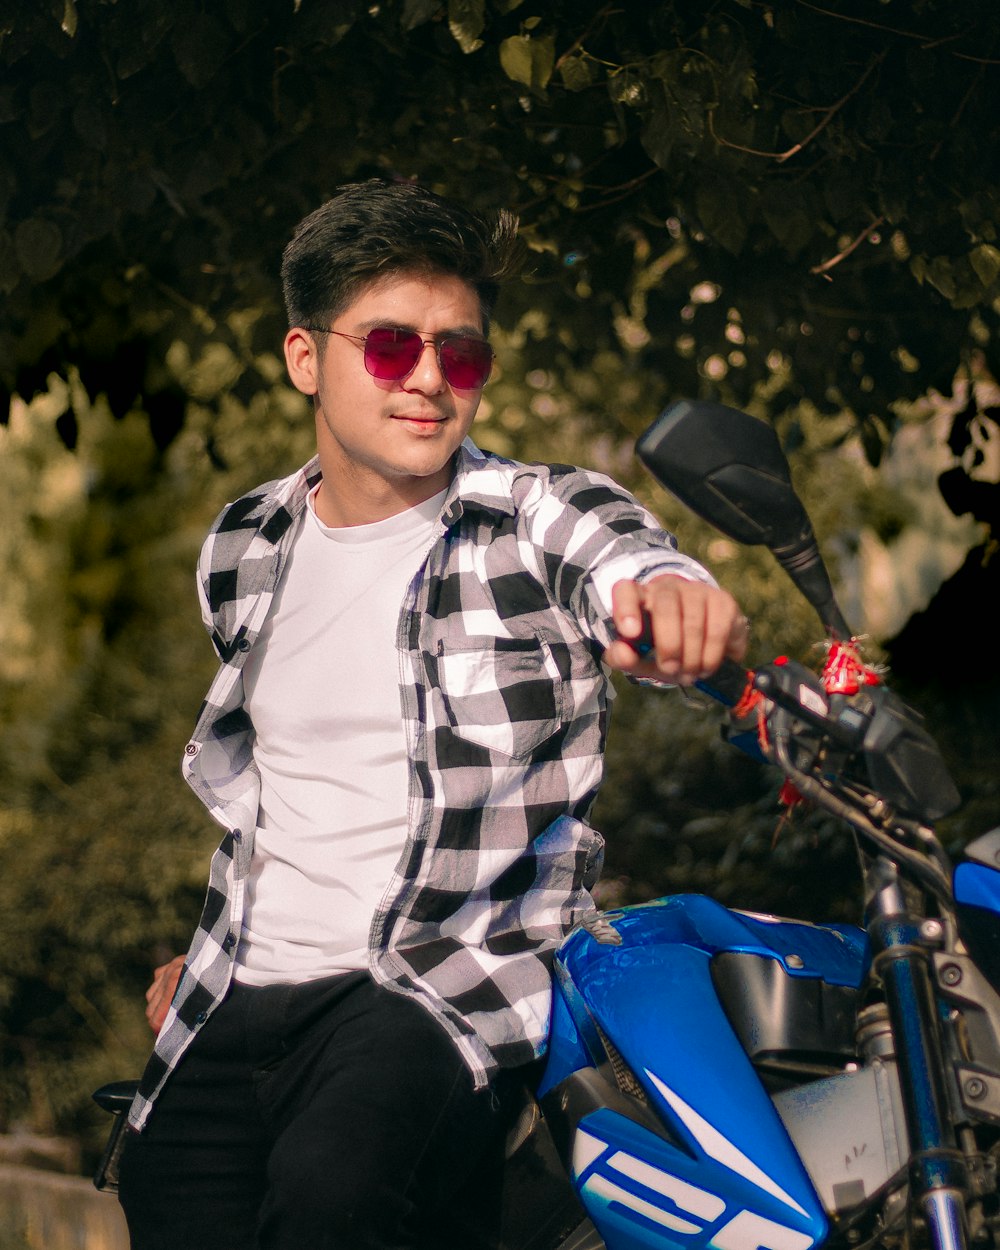 a person wearing sunglasses and standing next to a motorcycle